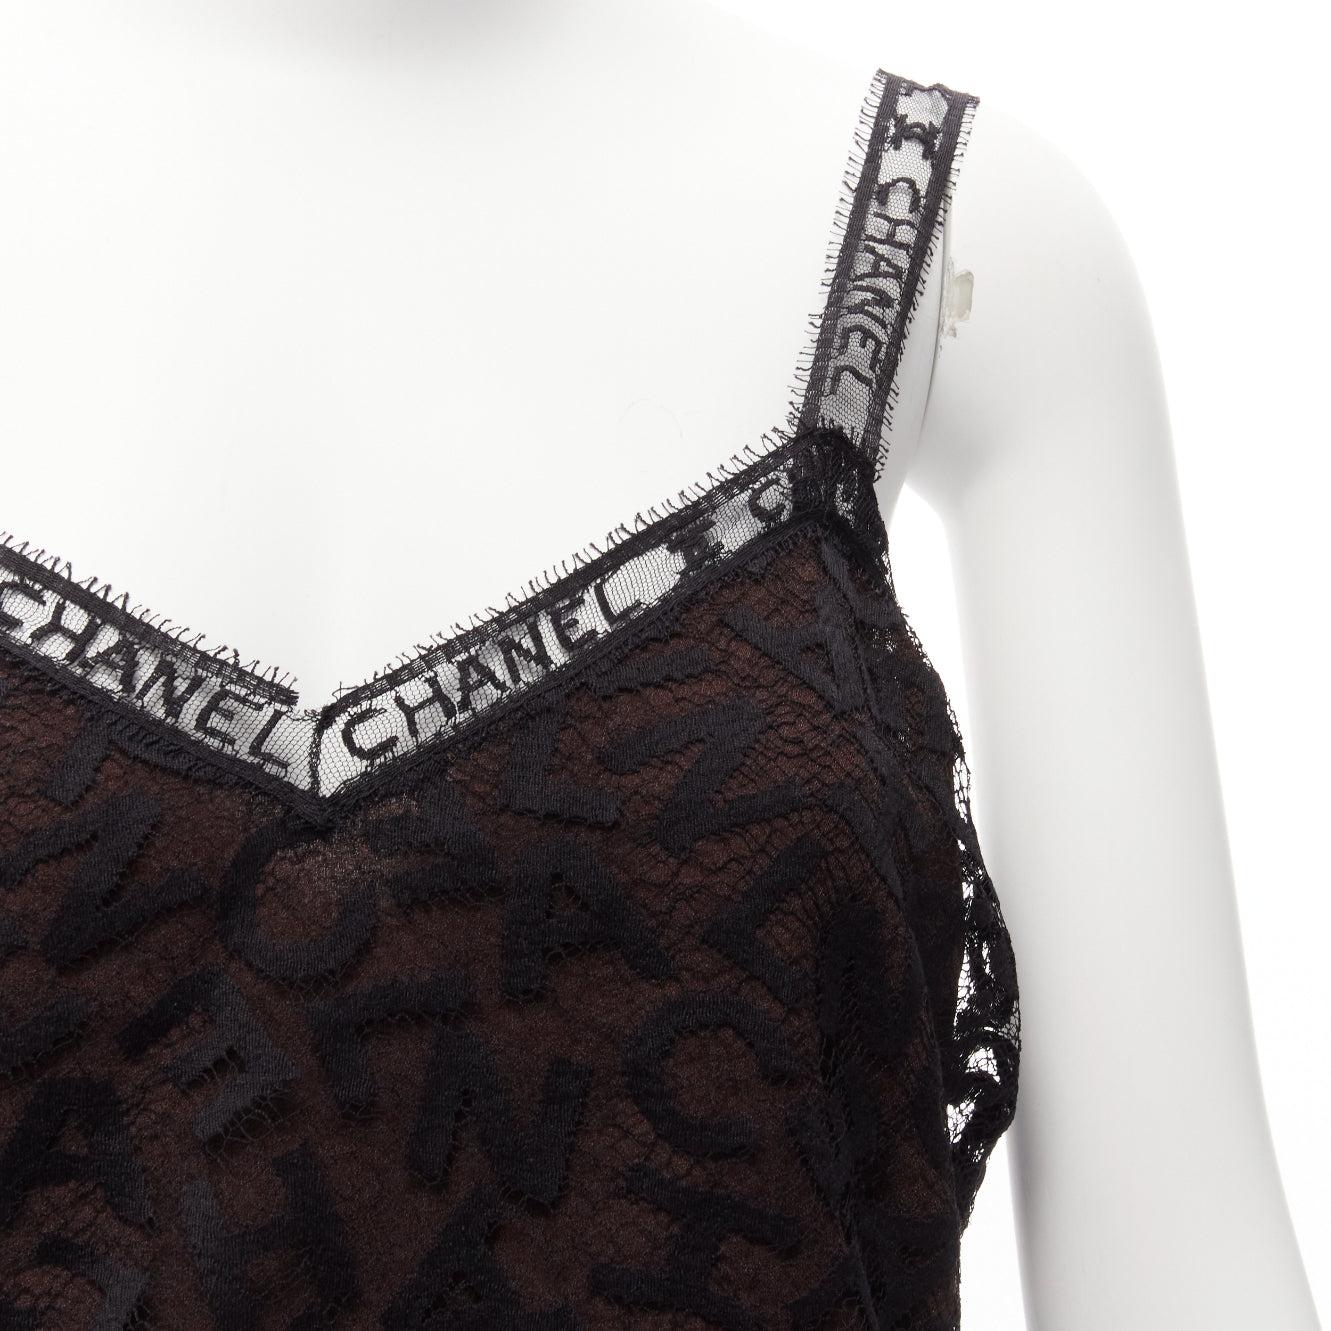 rare CHANEL 98A Karl Lagerfeld Runway Vintage black CC logo lace cami skirt set FR40 L
Reference: TGAS/D00759
Brand: Chanel
Designer: Karl Lagerfeld
Collection: FW 1998 - Runway
Material: Cotton, Blend
Color: Brown
Pattern: Lace
Closure: Slip